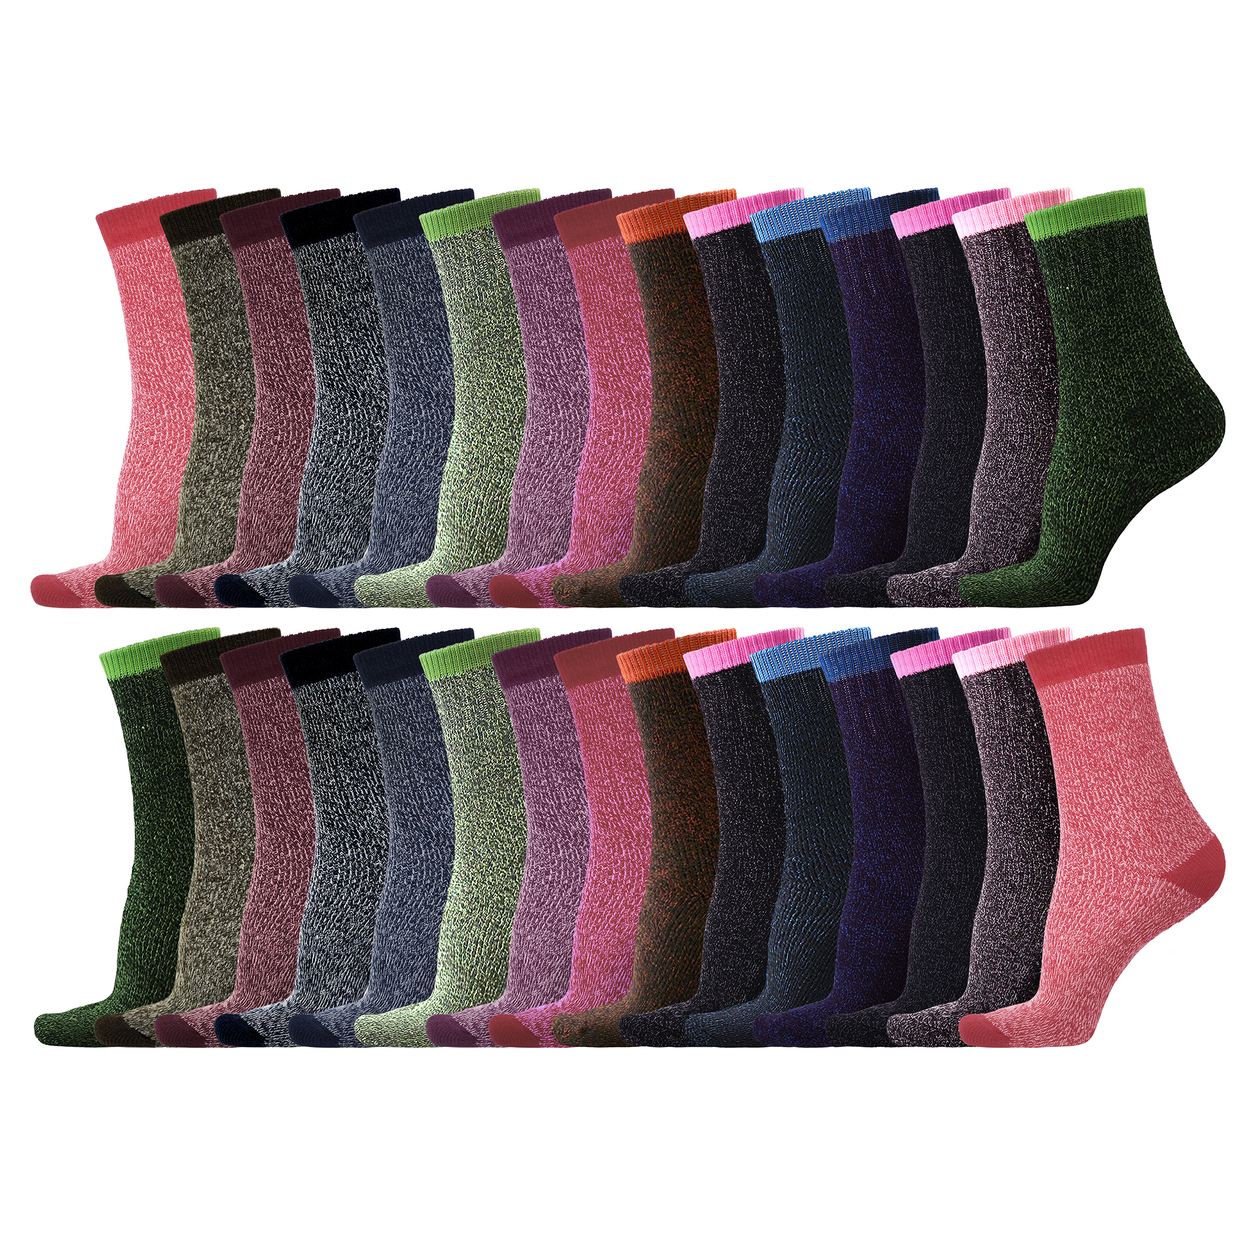 3-Pairs: Women's Cozy Soft Thick Winter Warm Thermal Insulated Heated Crew Socks